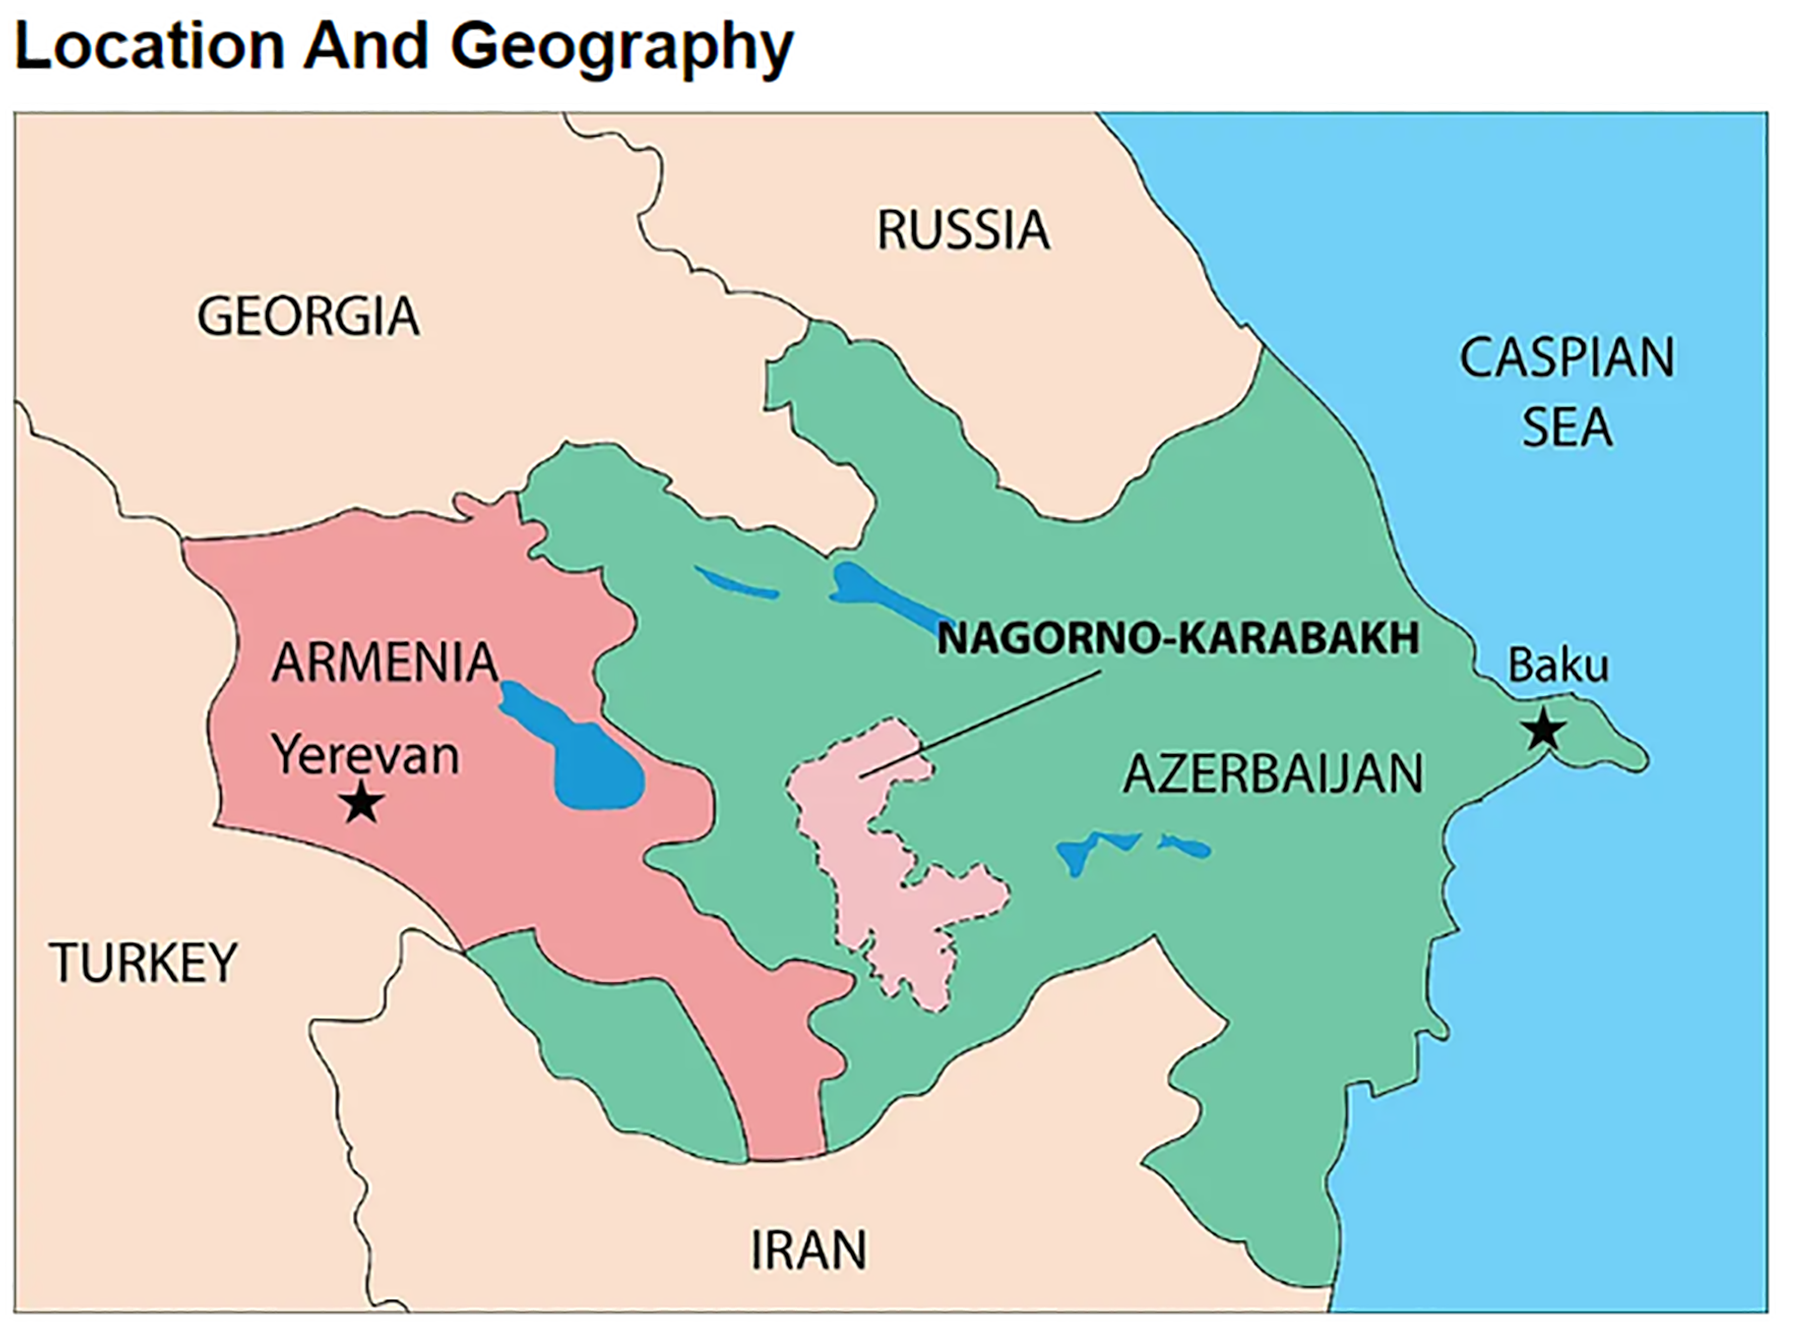 Why fears of another war between Armenia and Azerbaijan are growing